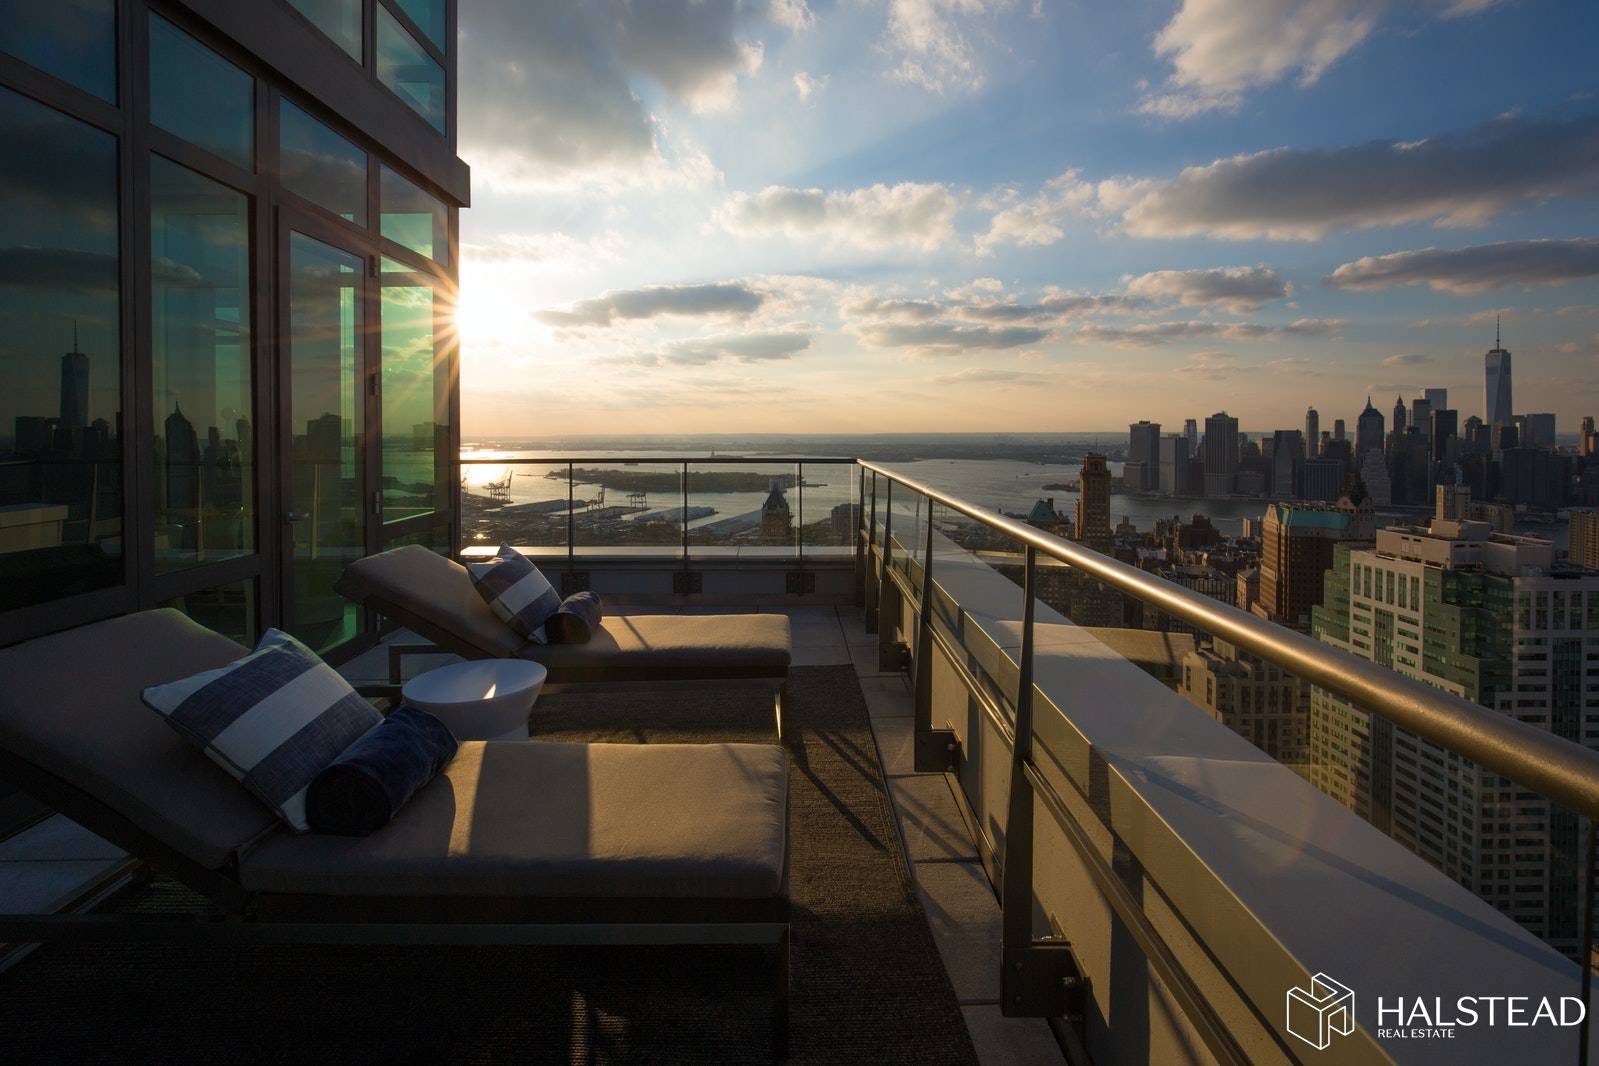 Available October 15. Duplex penthouse 53A at 388 Bridge is offering 2371 square feet of living space and 536 sq f of the private terrace on 54th floor overlooking Brooklyn.